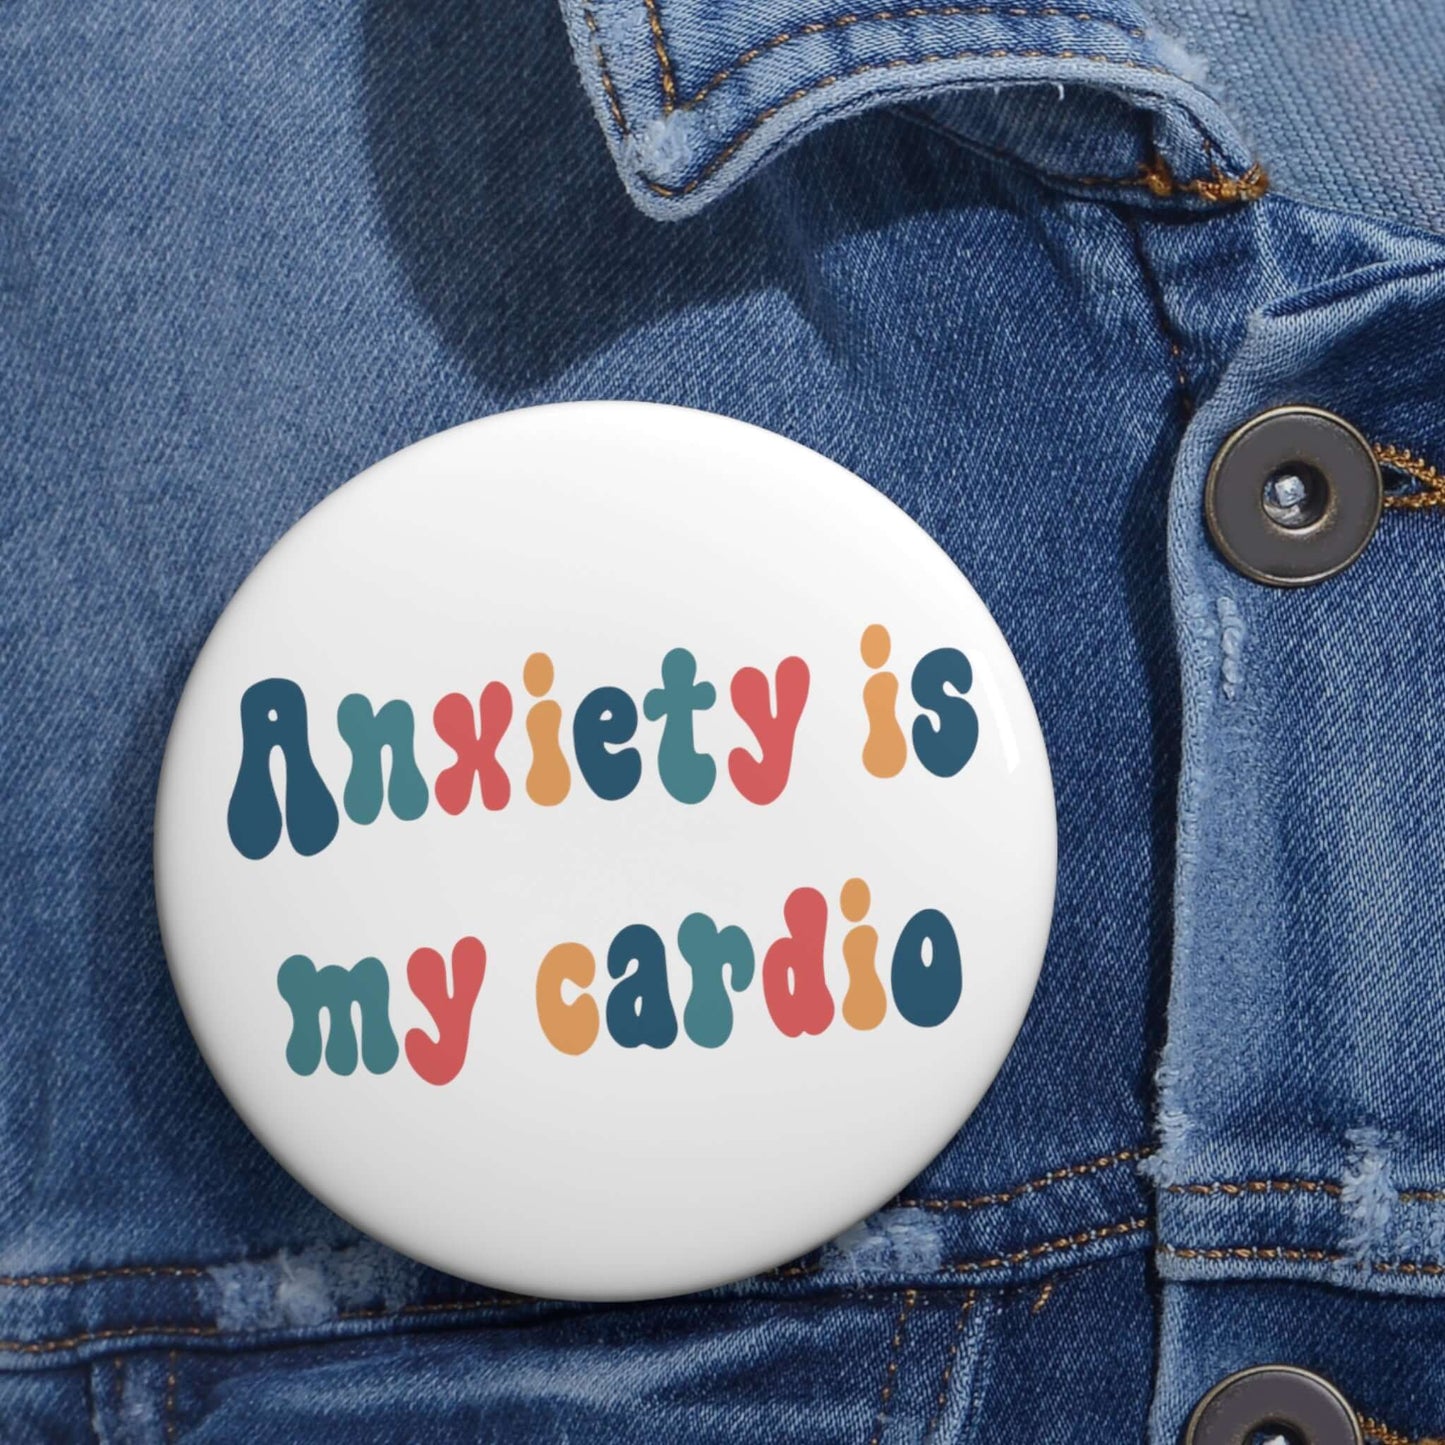 Anxiety is my cardio pinback button.